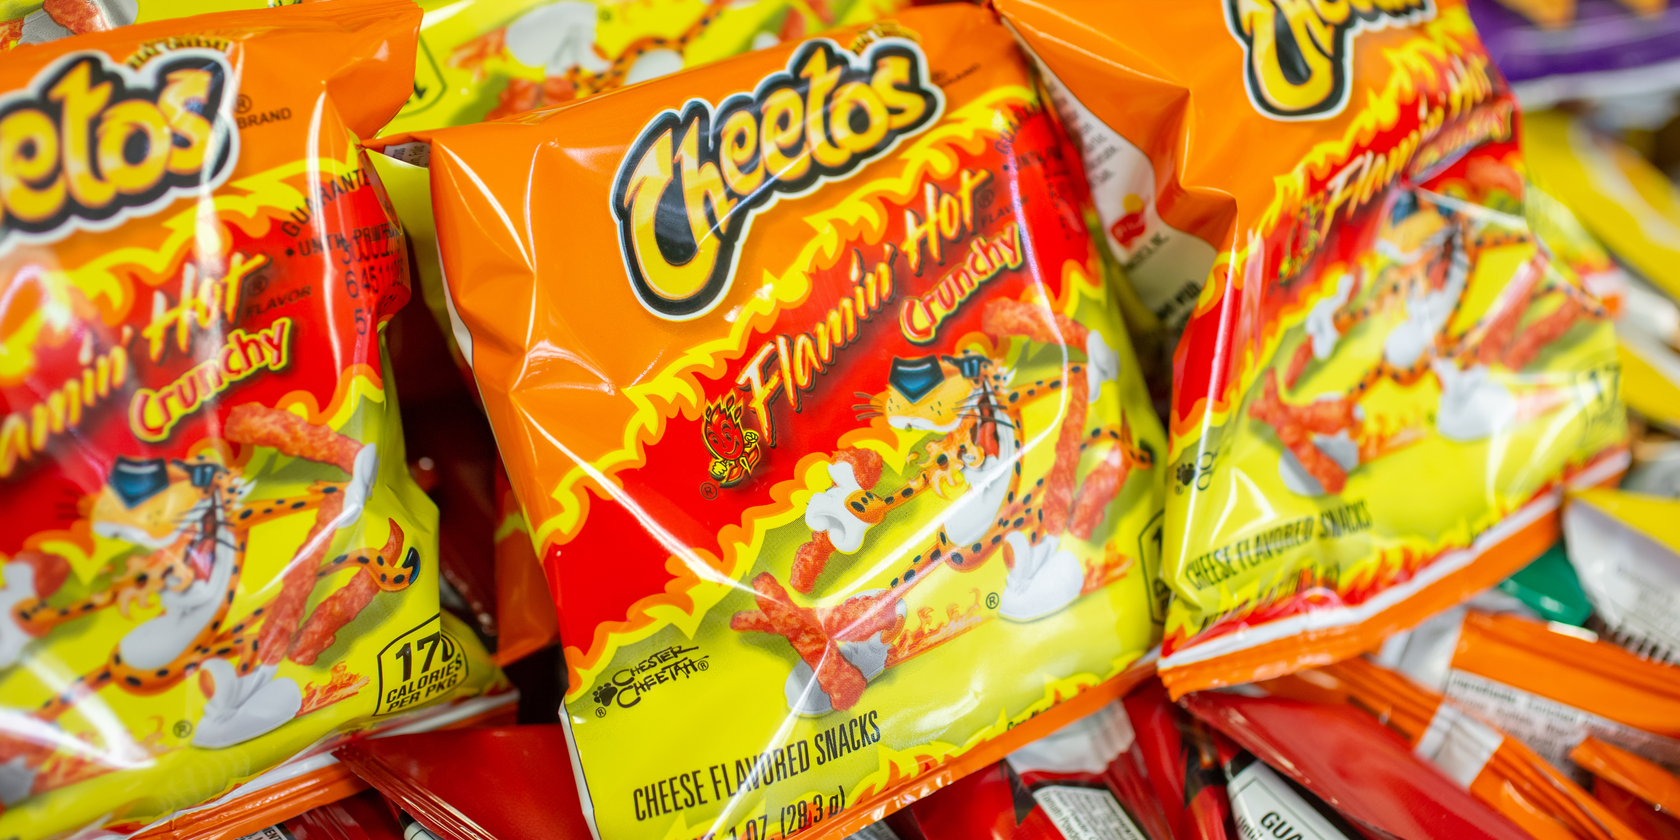 Bags of Cheetos